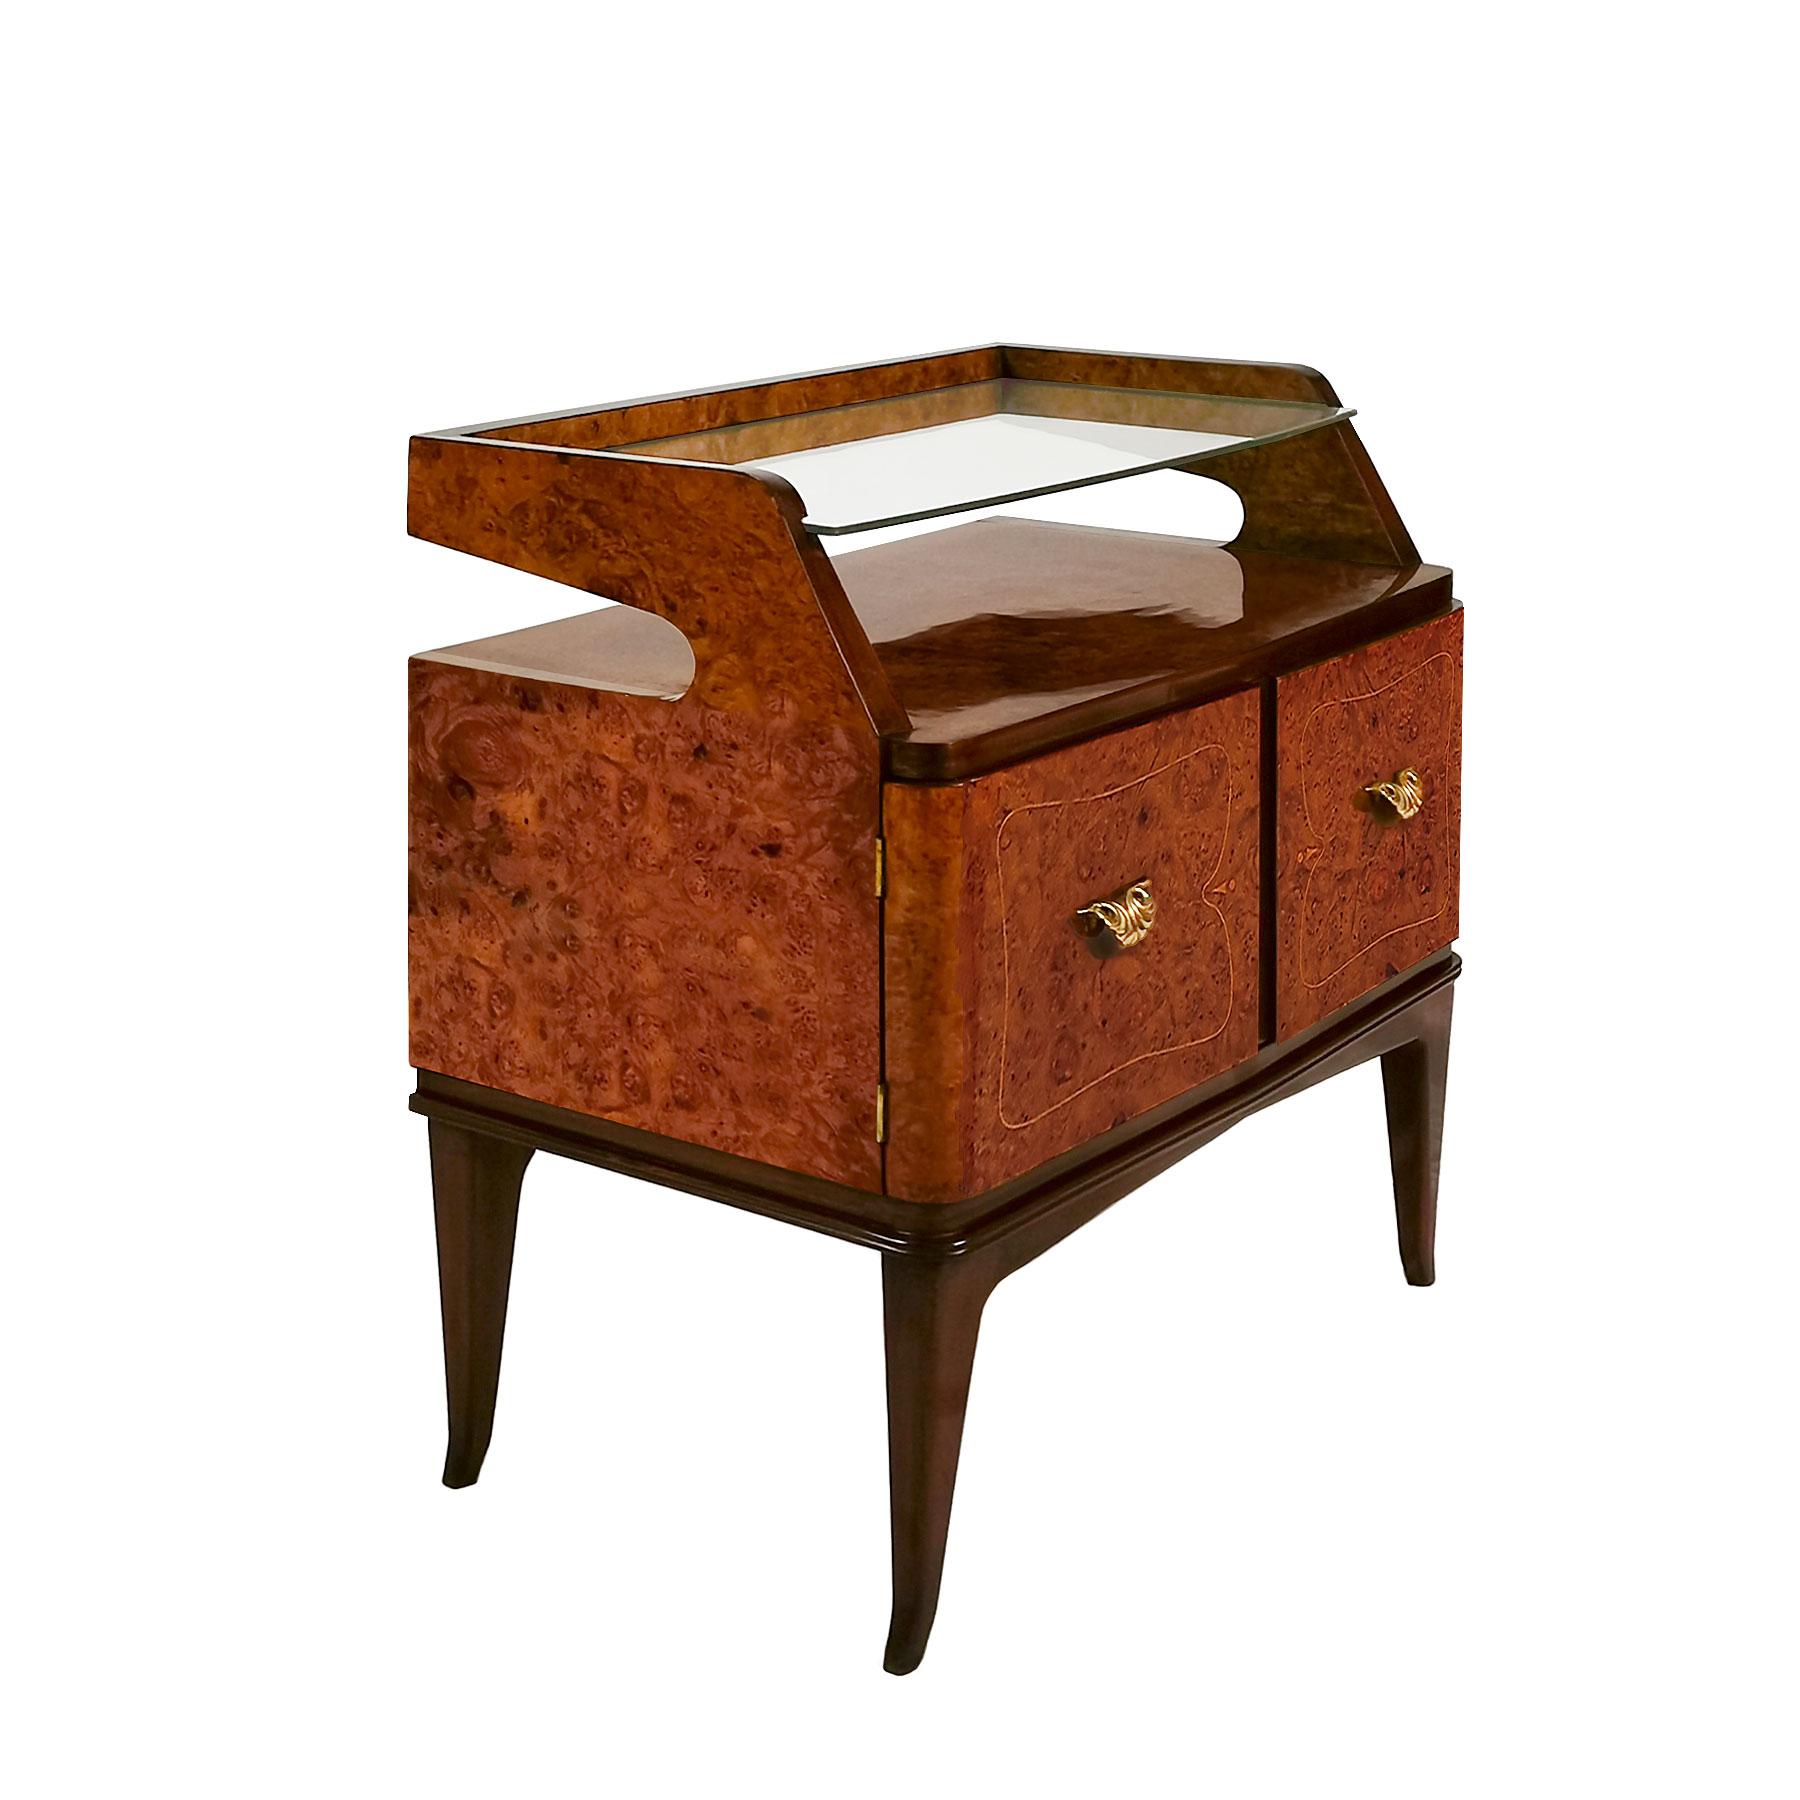 Pair of nightstands in solid and stained walnut, burr walnut veneer with a boxwood frieze, French polish. Polished brass handles and hinges, thick originals glasses on top.

Italy, circa 1940.